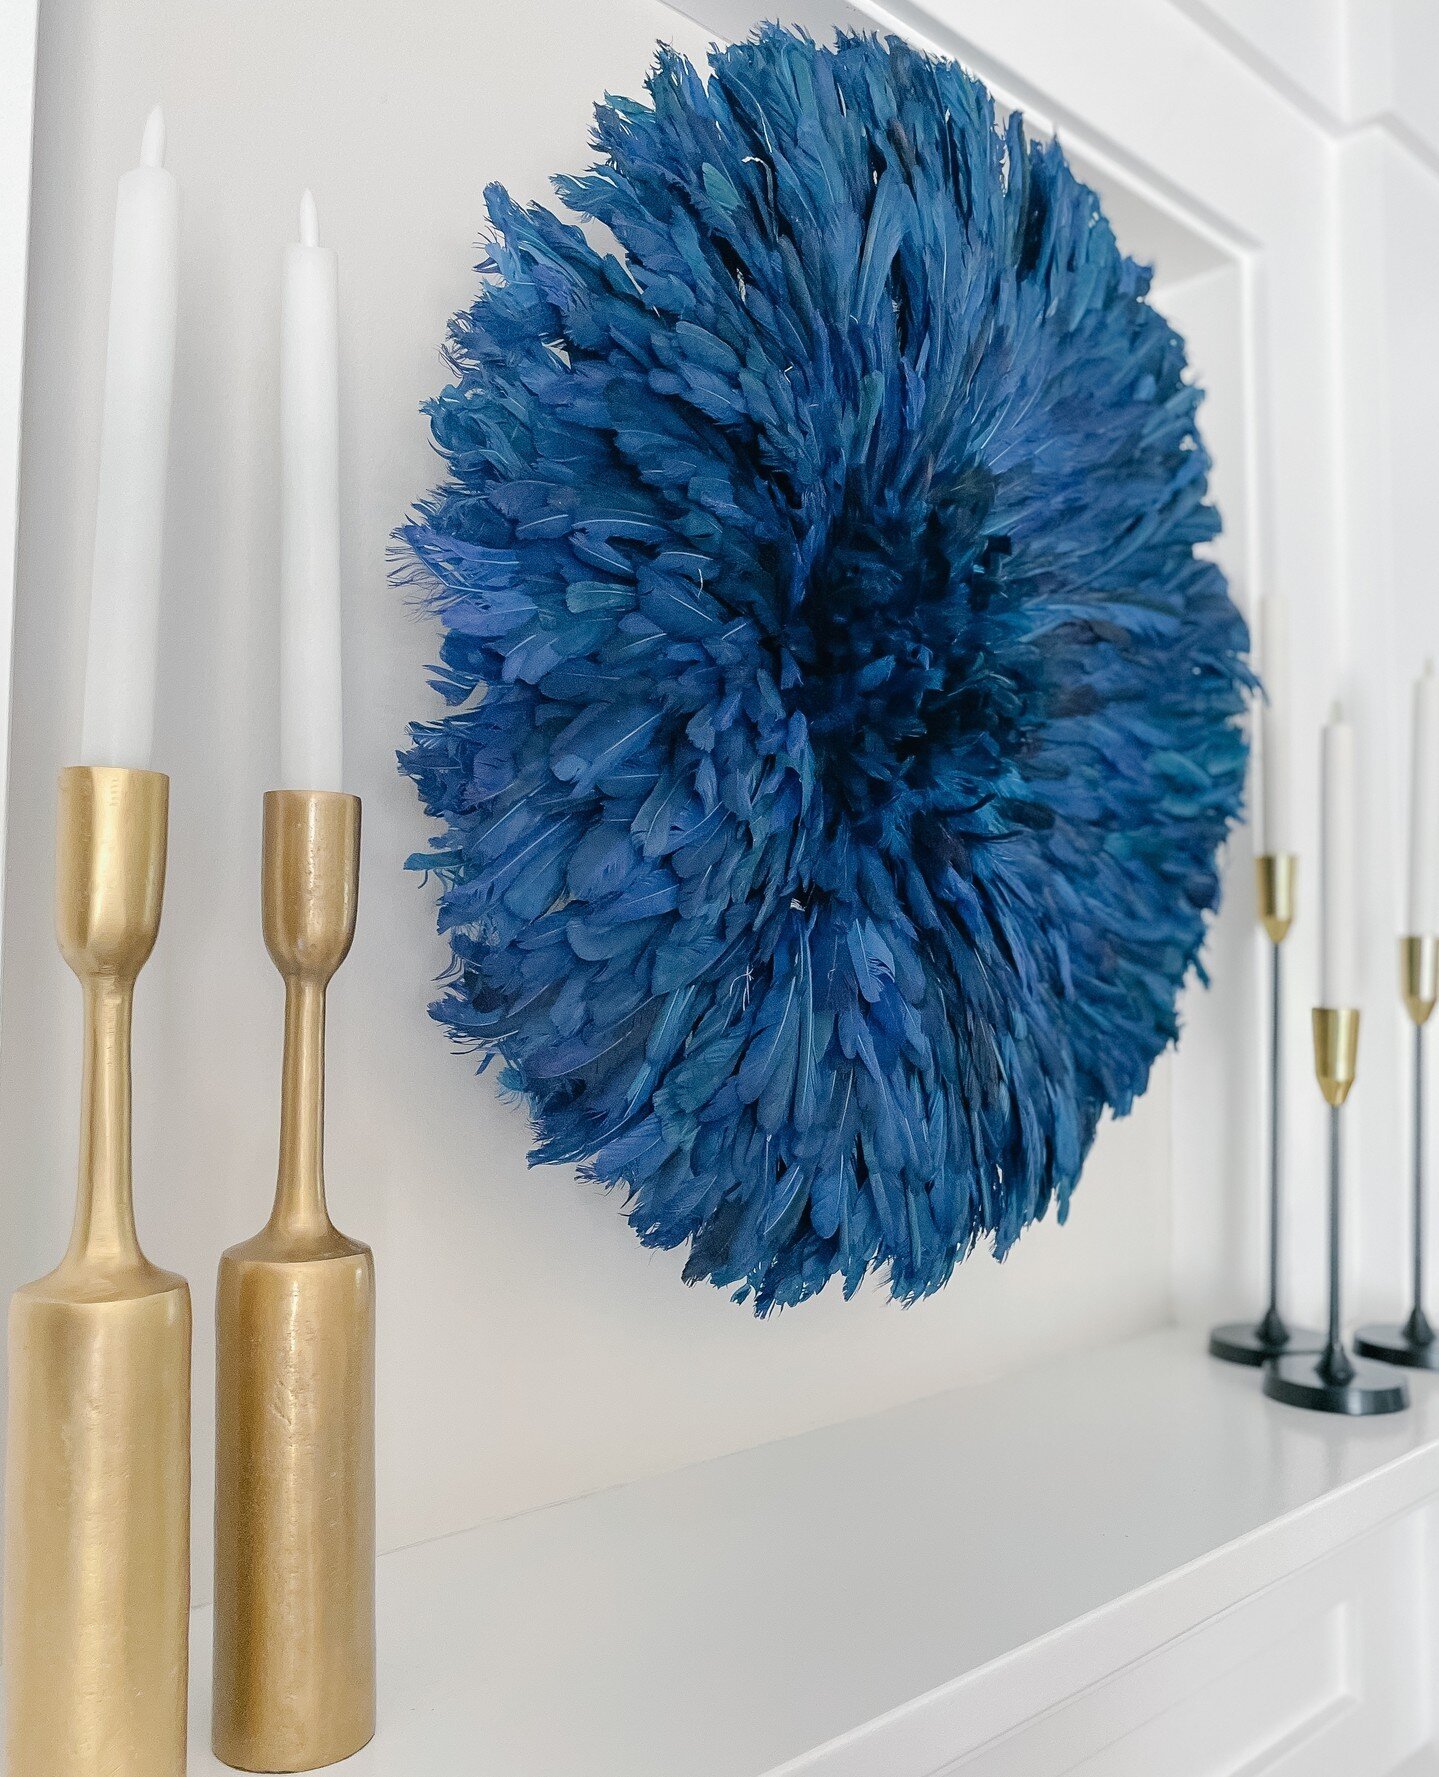 Another beautiful juju hat by @picoarthouse! This hat perfectly matches our living room d&eacute;cor right now. We're going for a navy blue and gold theme!⁠
⁠
Save this picture for some mantlepiece inspo or send this to a friend who's looking to swit